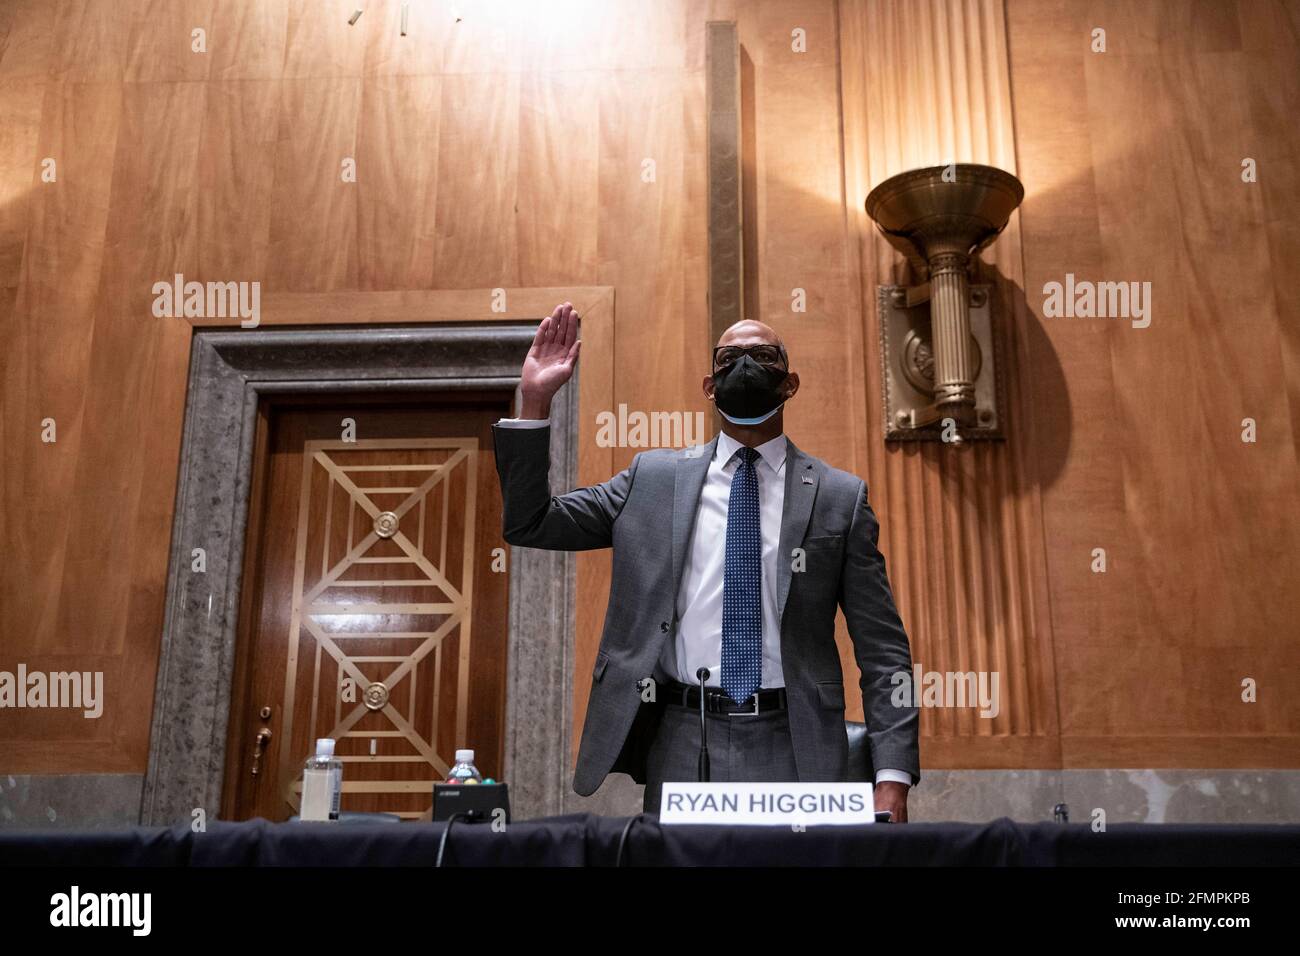 Washington, USA. 11th May, 2021. Ryan Higgins, chief information security officer at the U.S. Department of Commerce, is sworn in to testify before the Senate Homeland Security and Governmental Affairs Committee in Washington, DC, U.S., on Tuesday, May 11, 2021. The hearing is titled 'Prevention, Response, and Recovery: Improving Federal Cybersecurity Post-SolarWinds.' (Photo by Sarah Silbiger/Pool/Sipa USA) Credit: Sipa USA/Alamy Live News Stock Photo